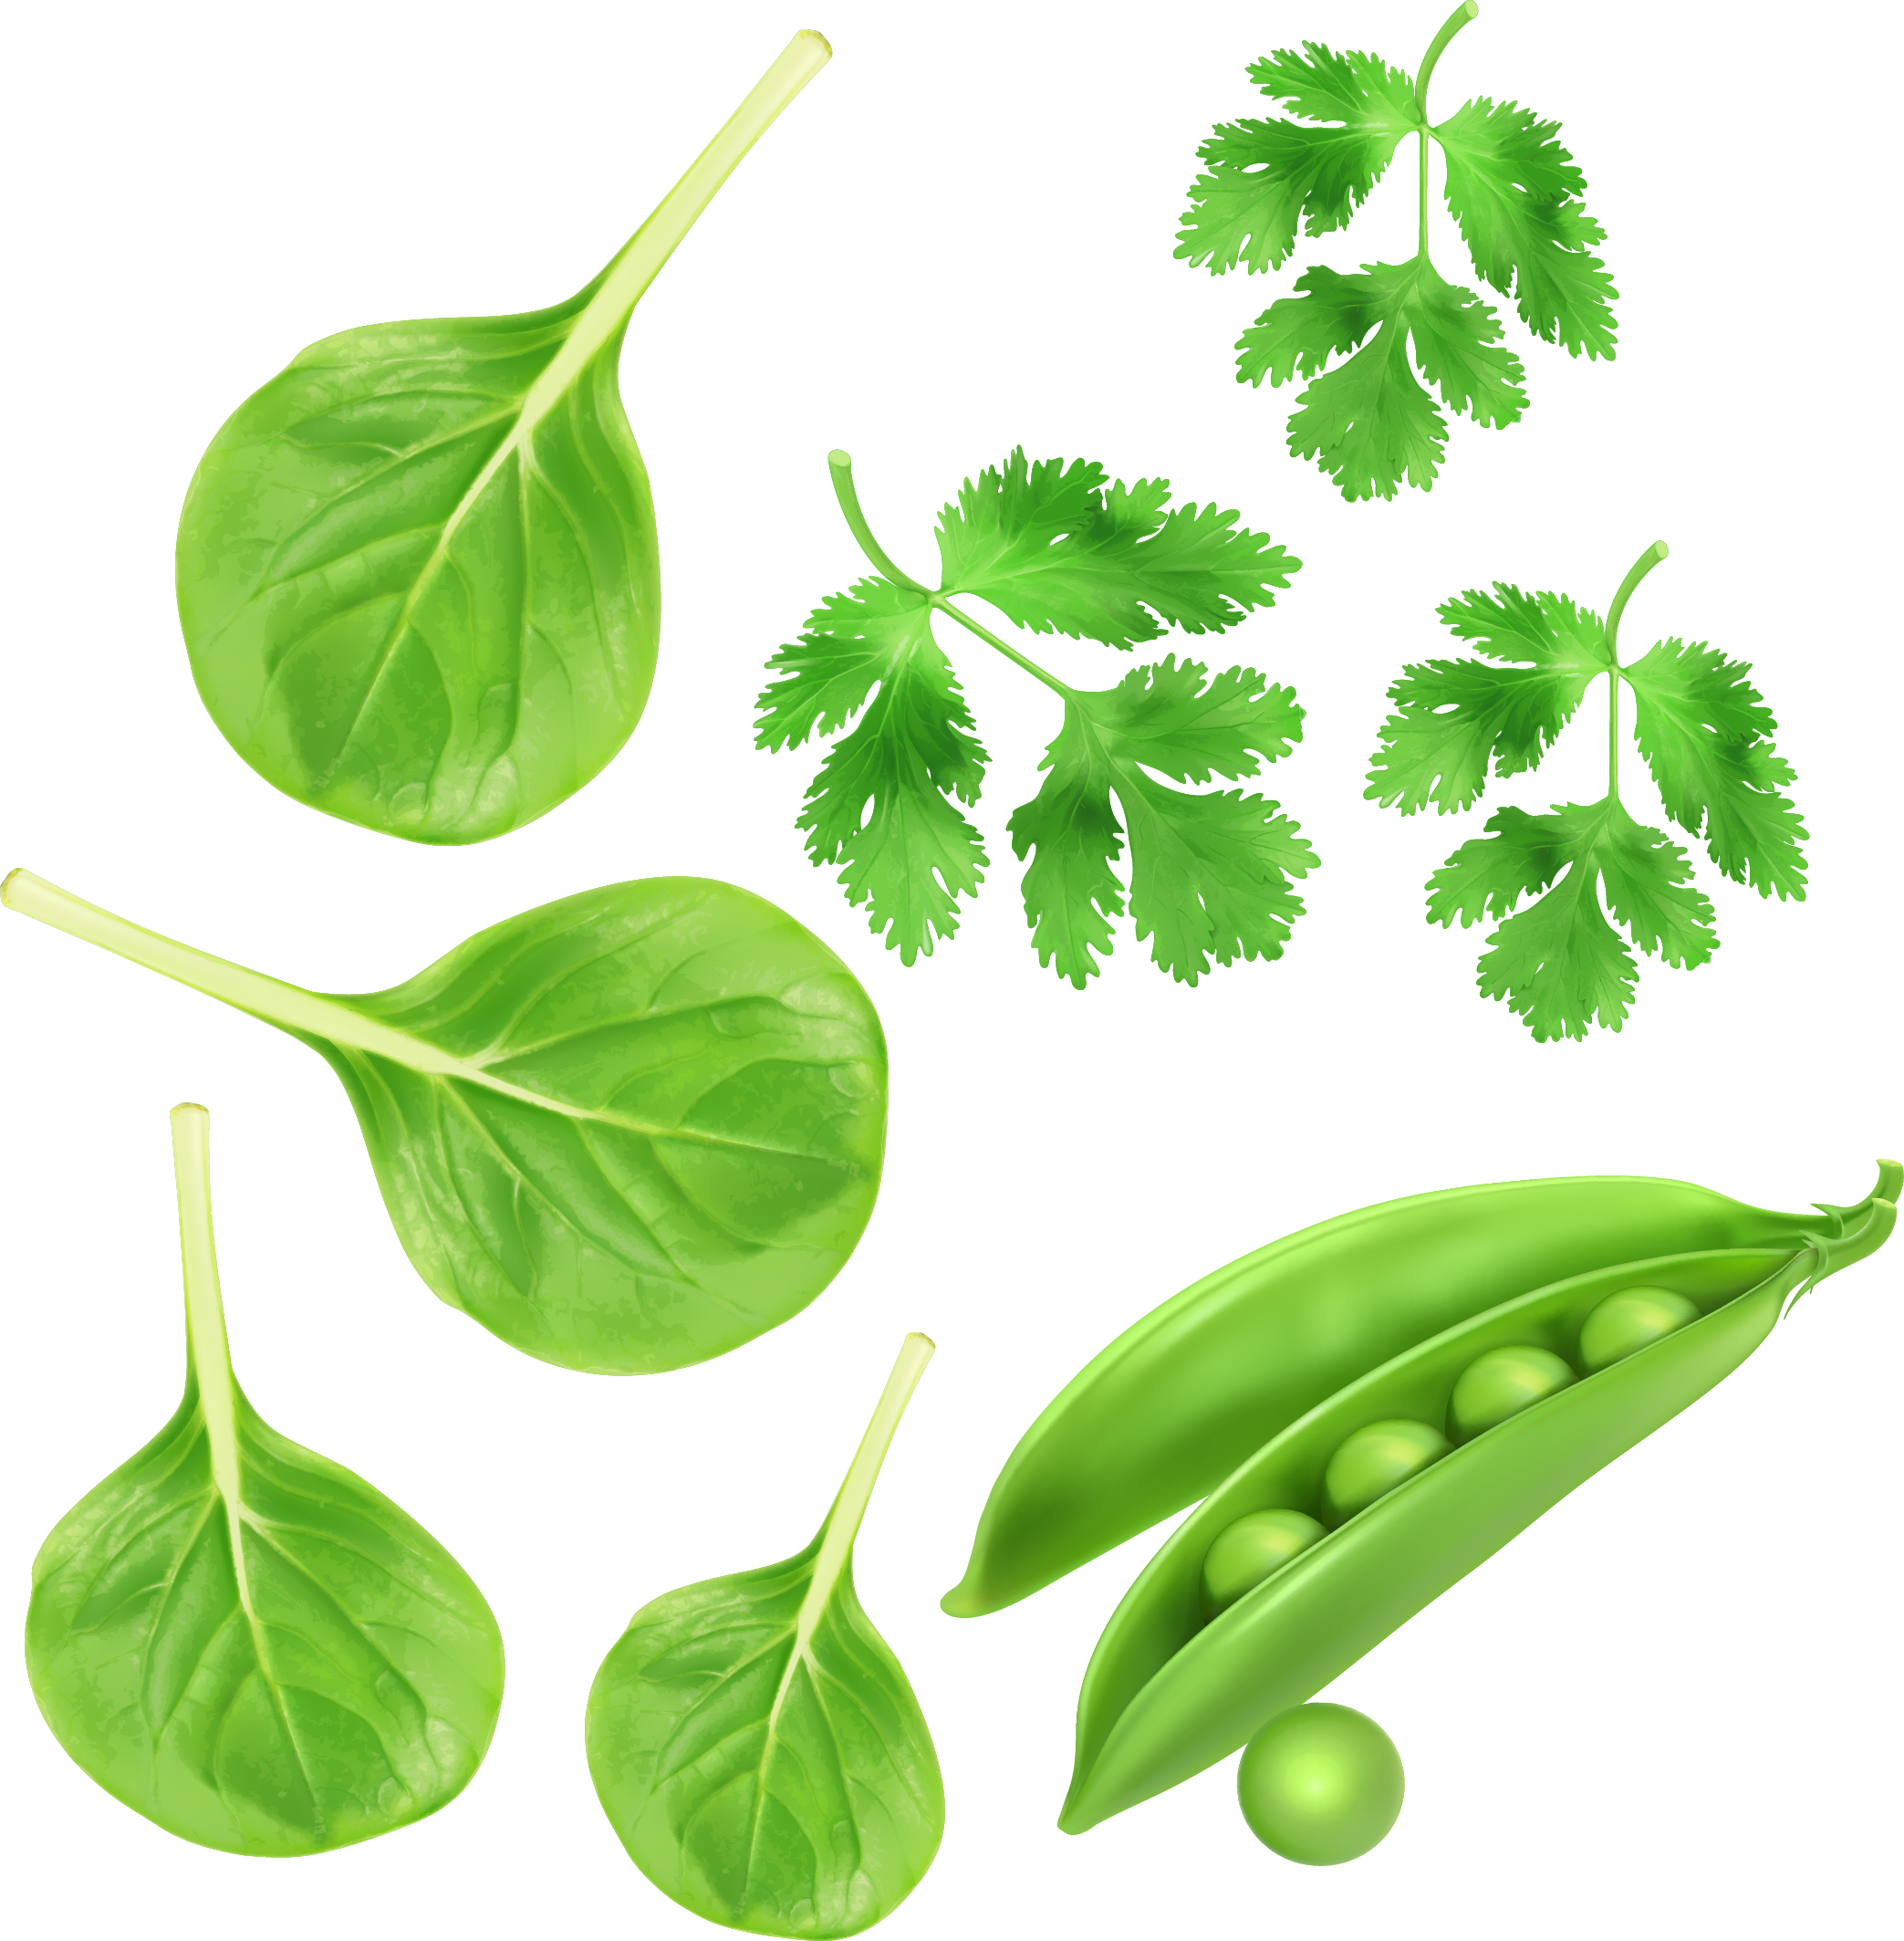 A Group Of Leaves And A Pea